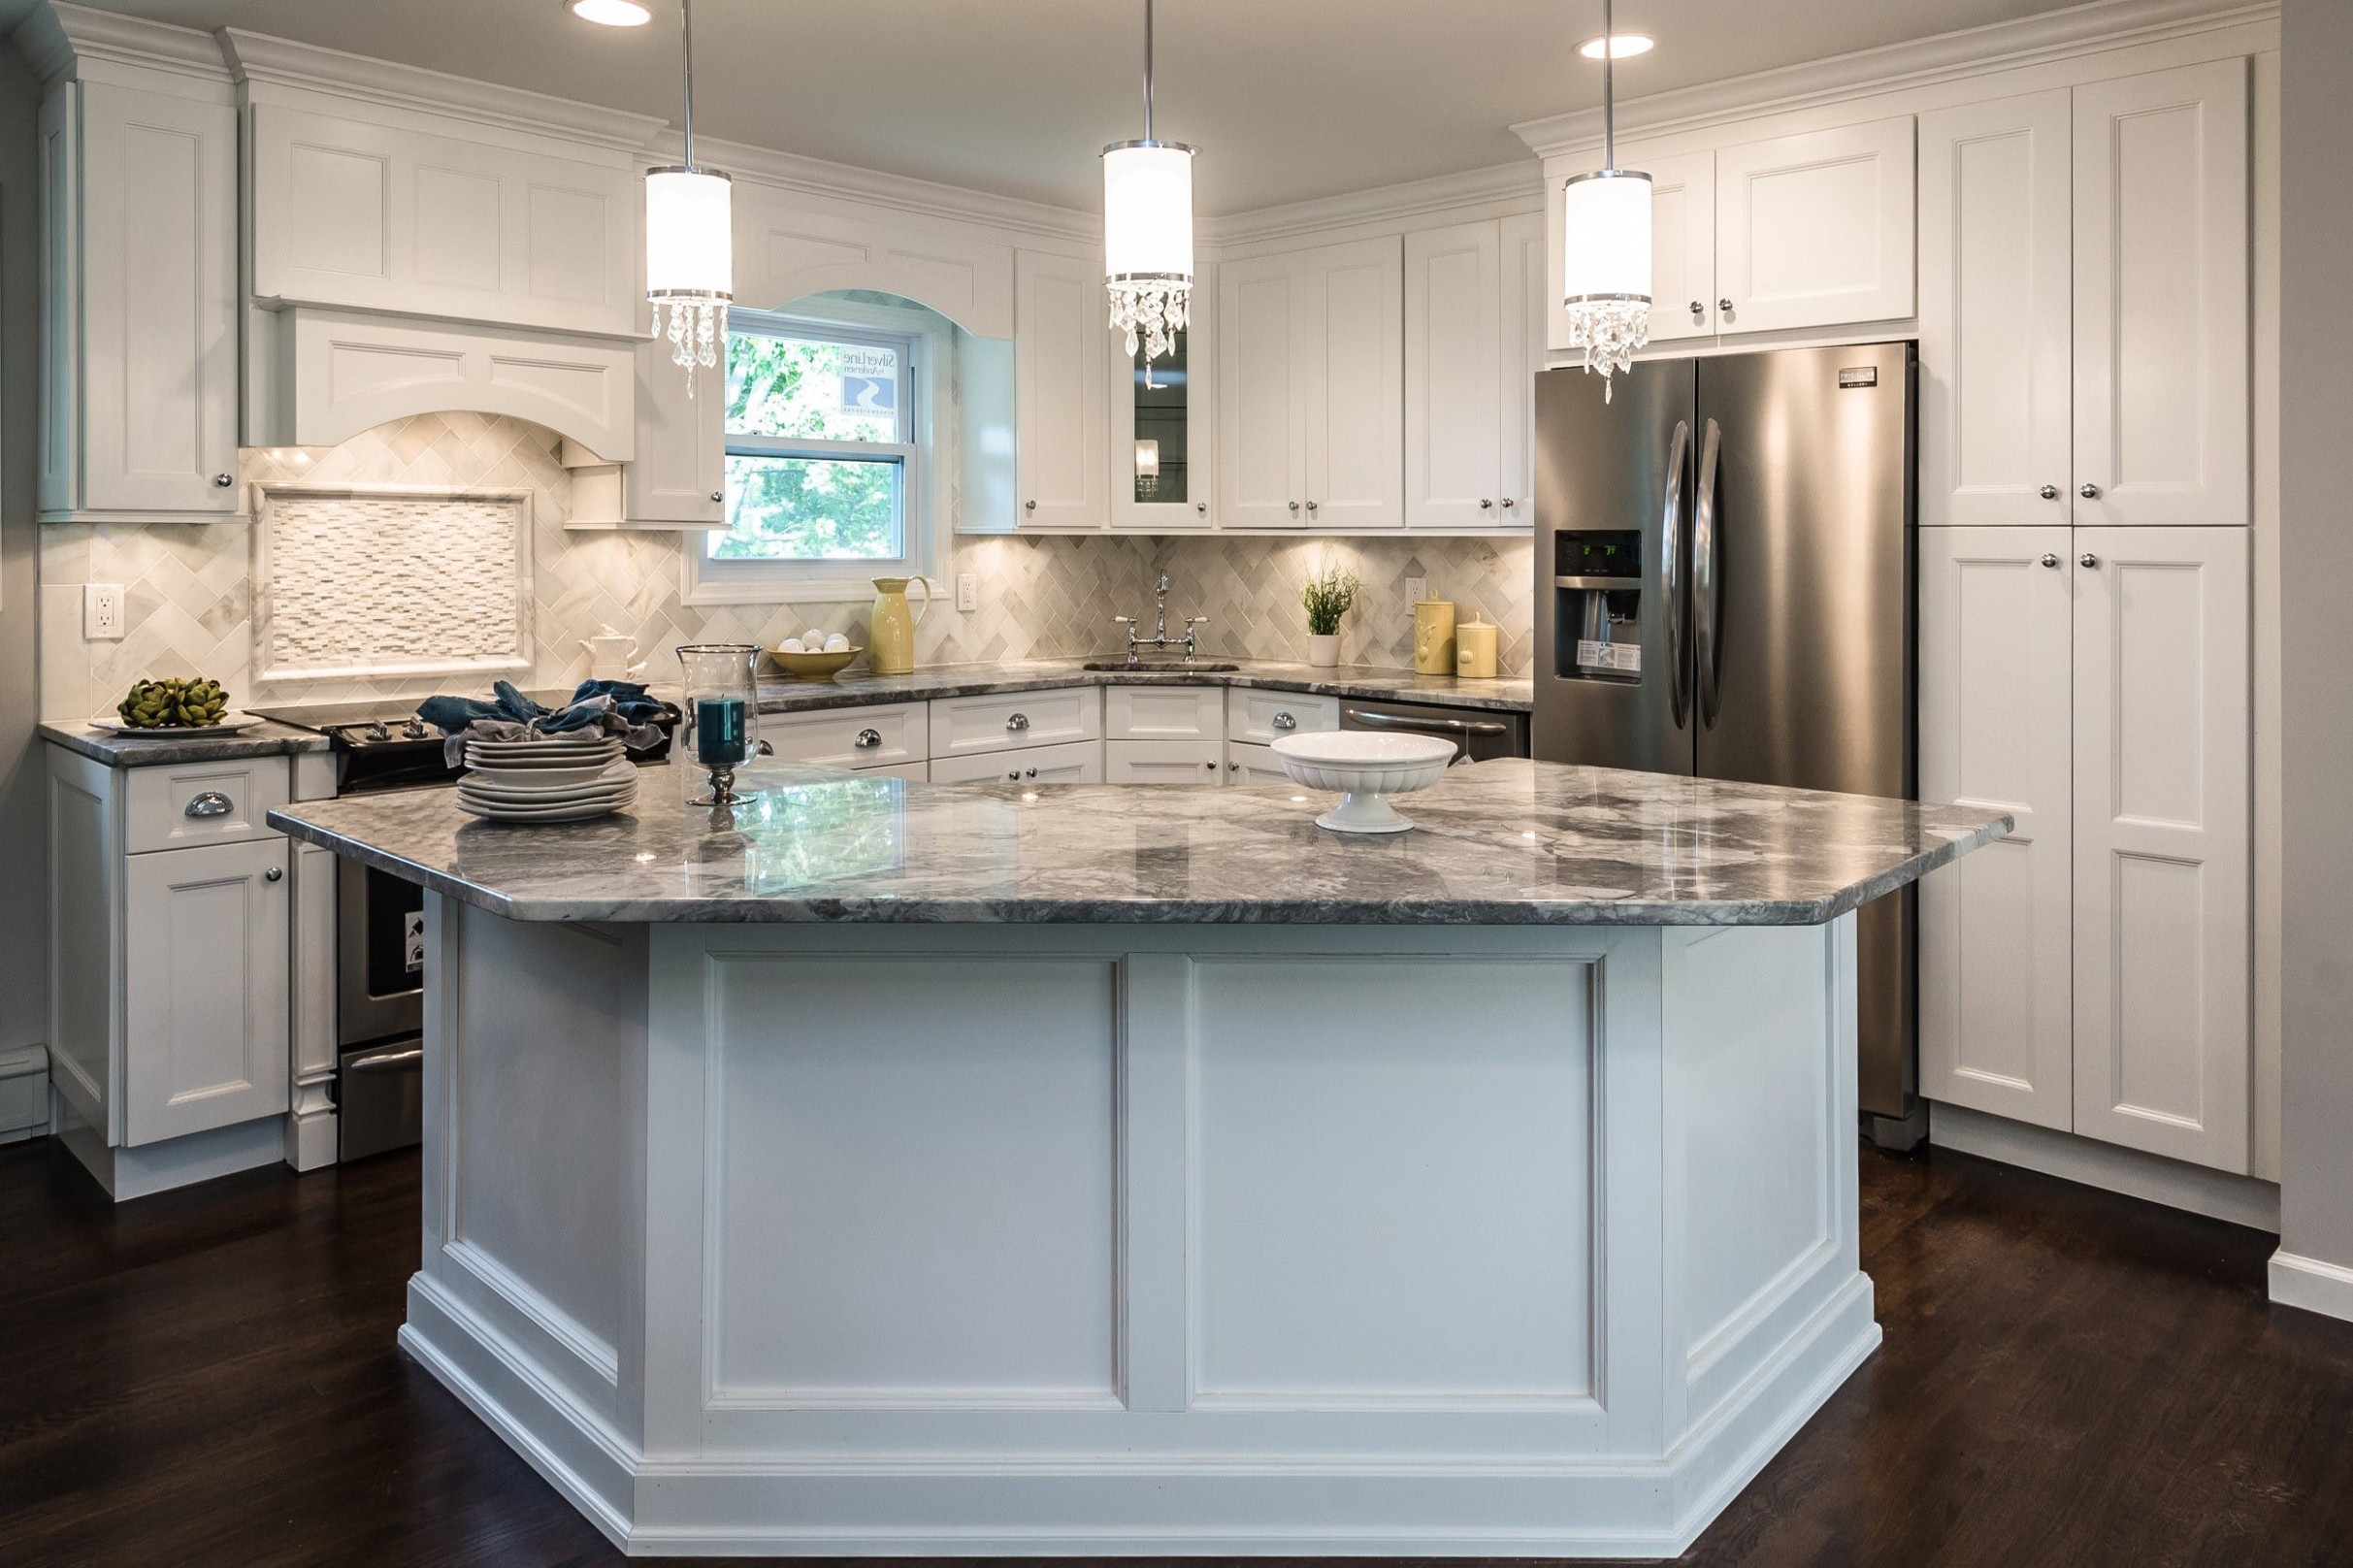 How to pair kitchen countertops and cabinets - what color granite countertops go with white cabinets?